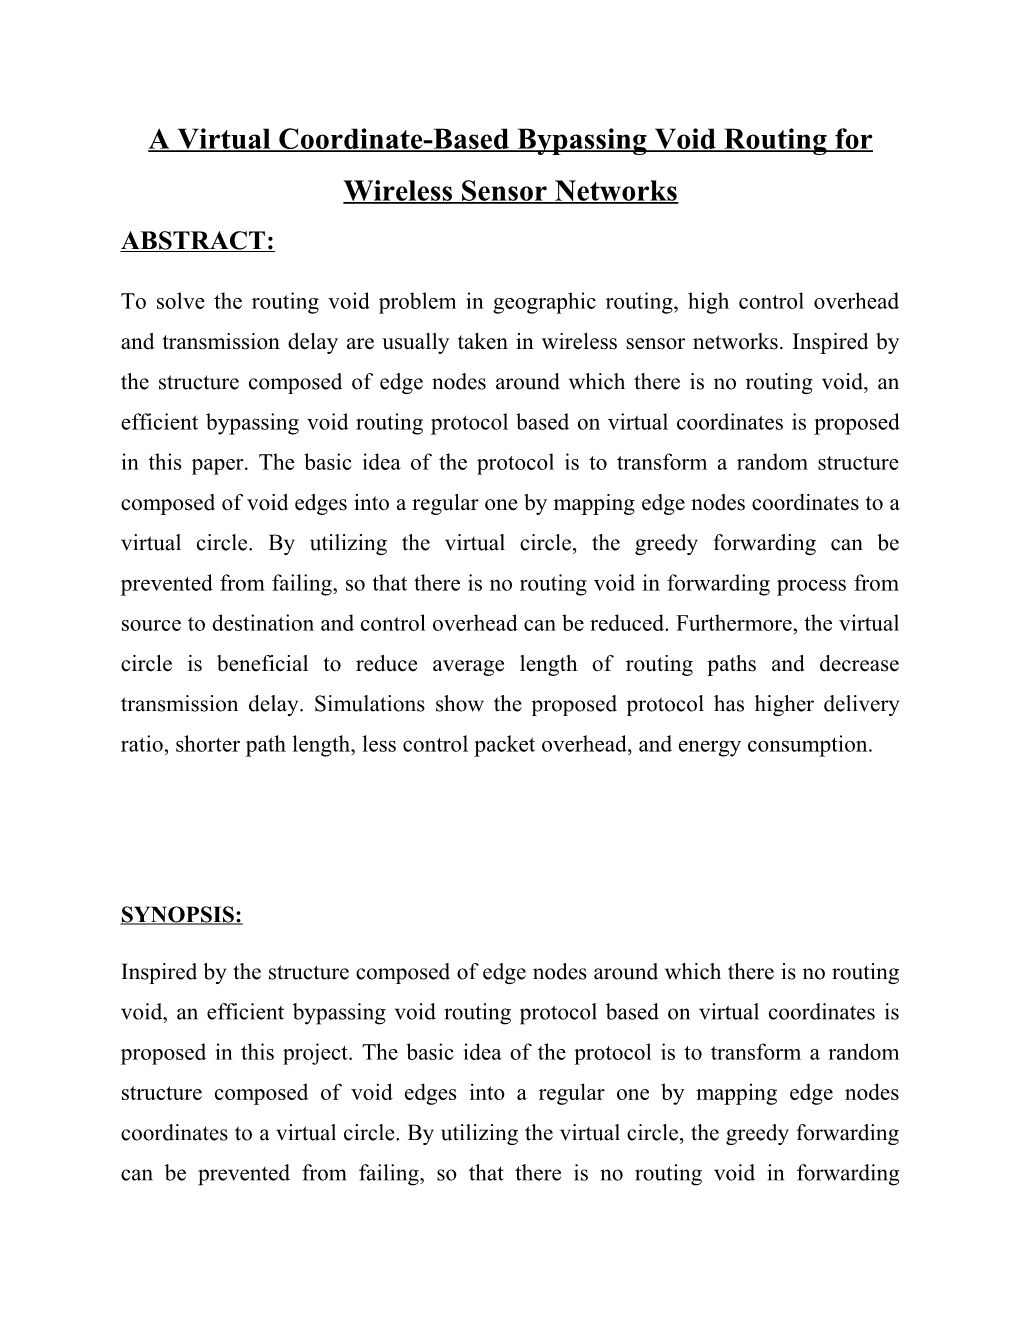 A Virtual Coordinate-Based Bypassing Void Routing for Wireless Sensor Networks